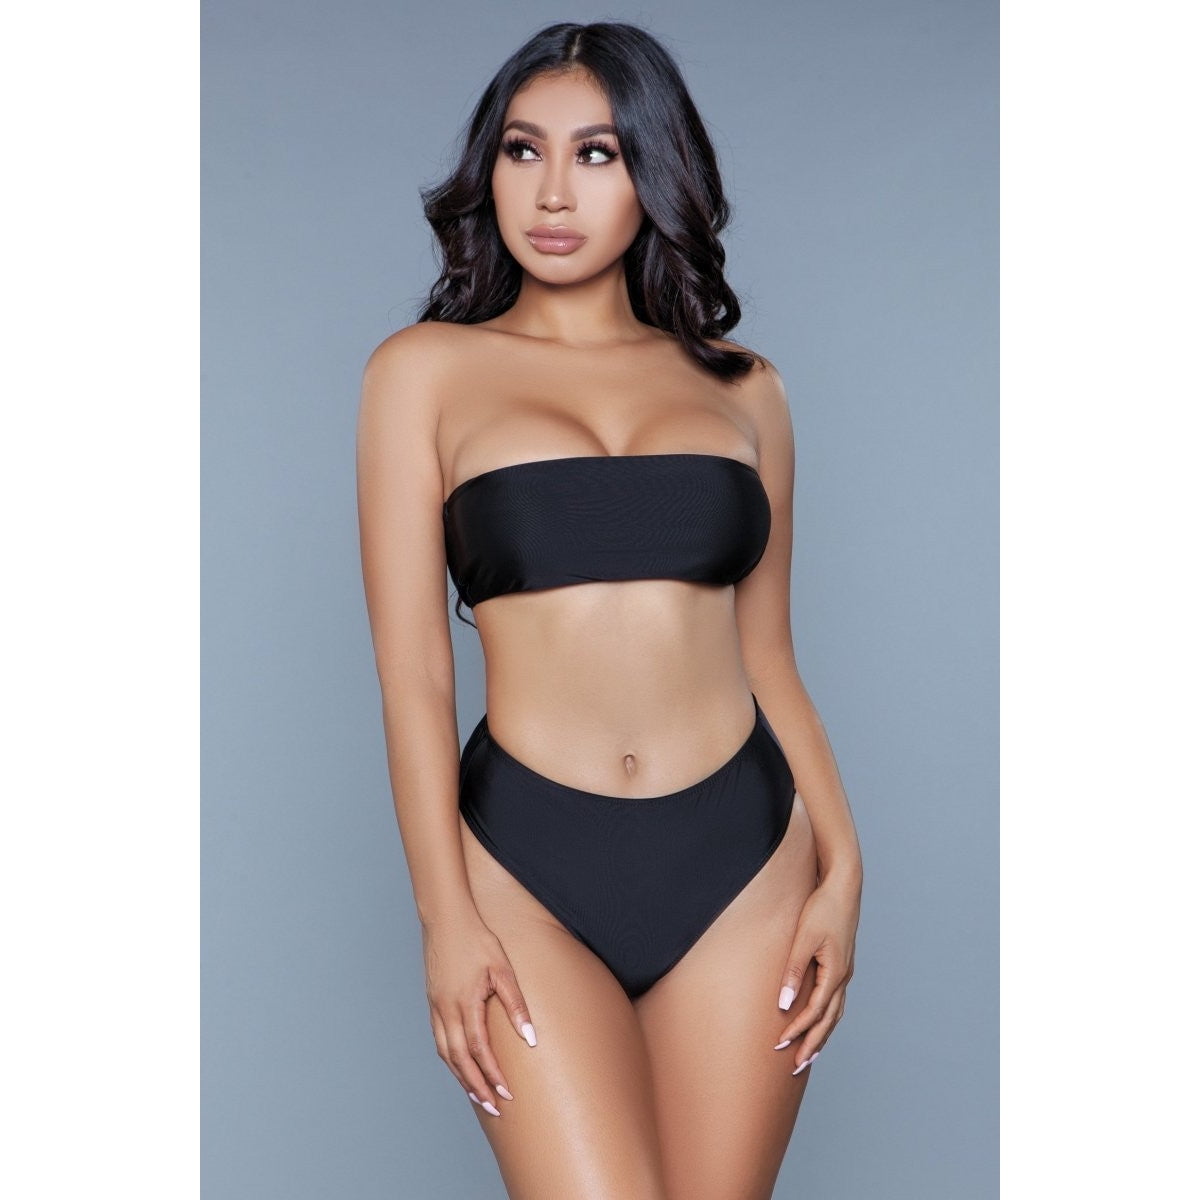 Picture of BeWicked 1974-L-BLACK Women Serenity Swimsuit, Black - Large - 2 Piece